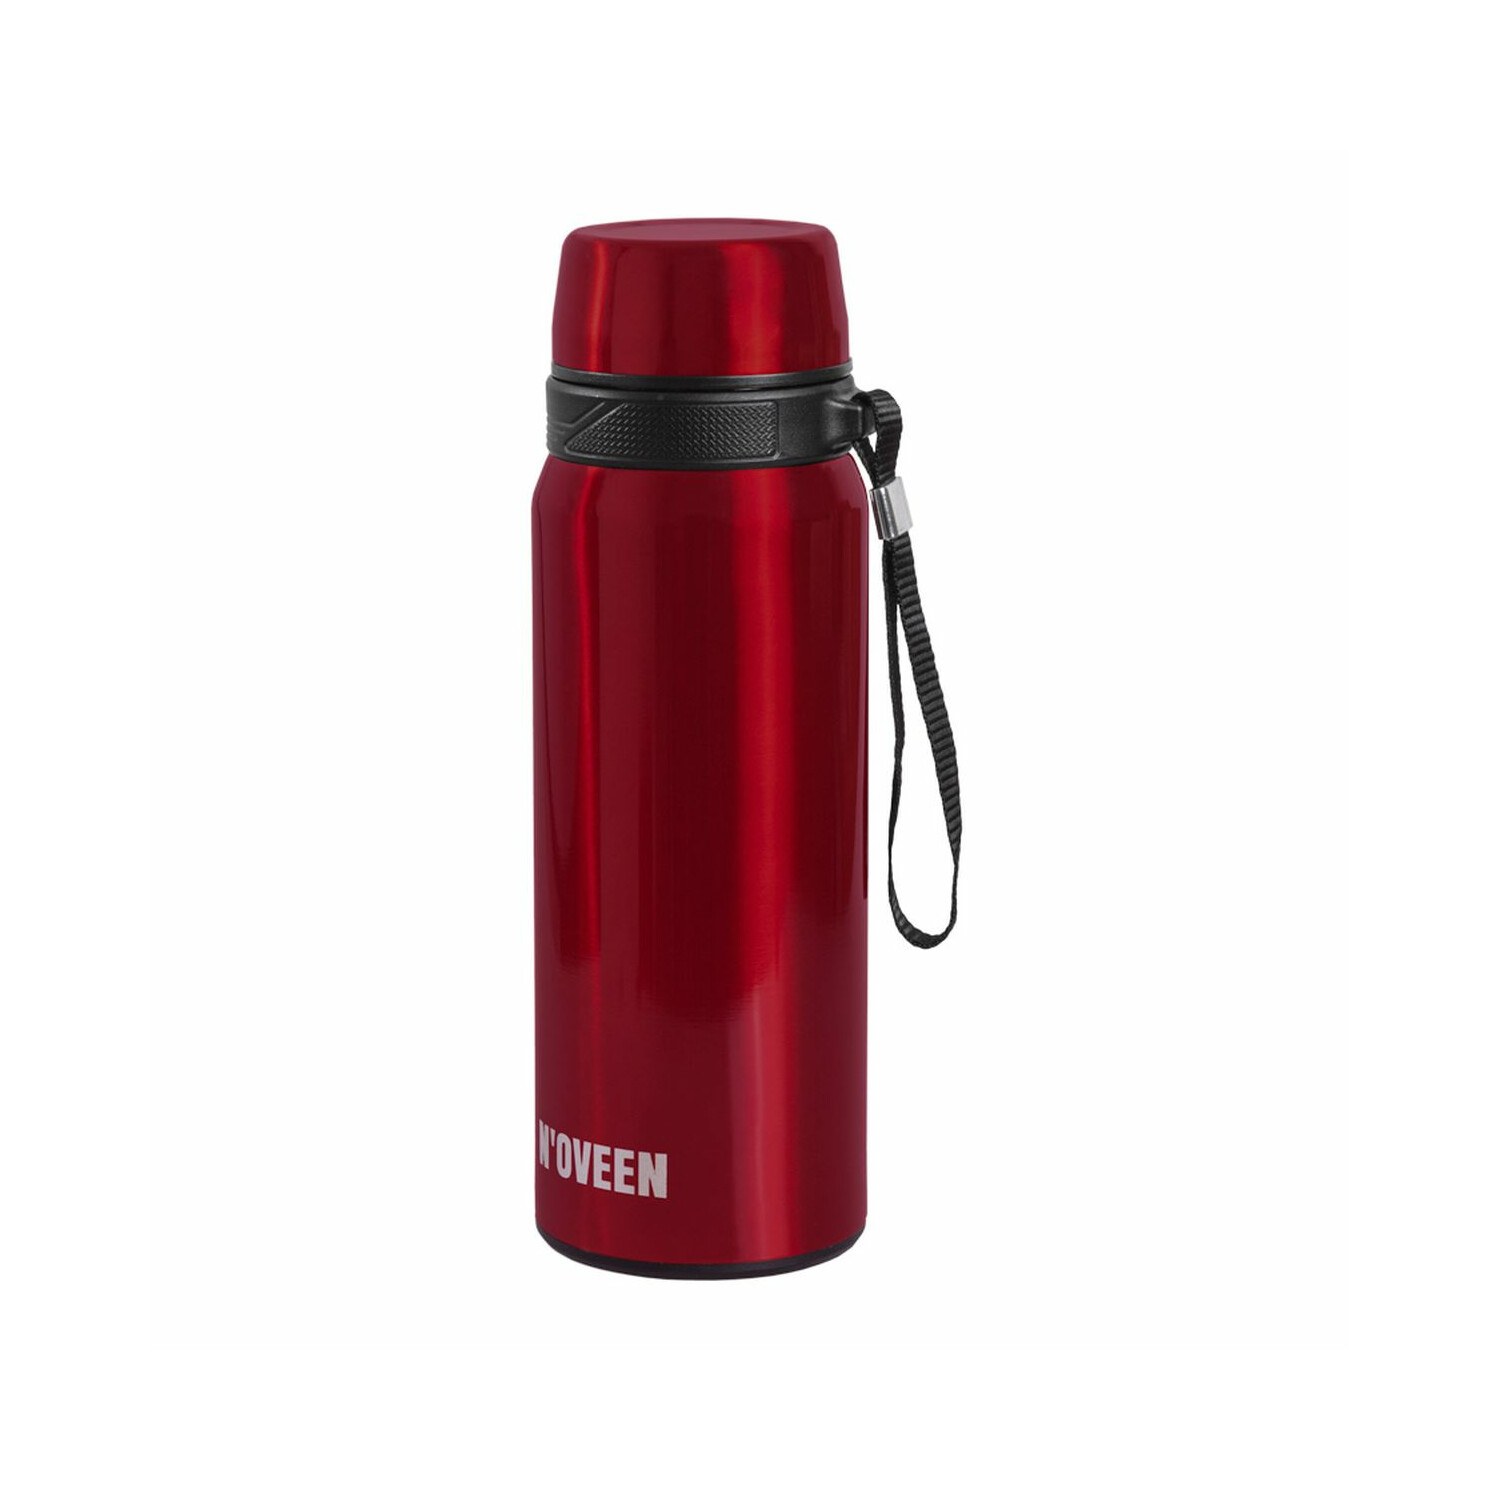 NOVEEN TB625 Thermoflasche